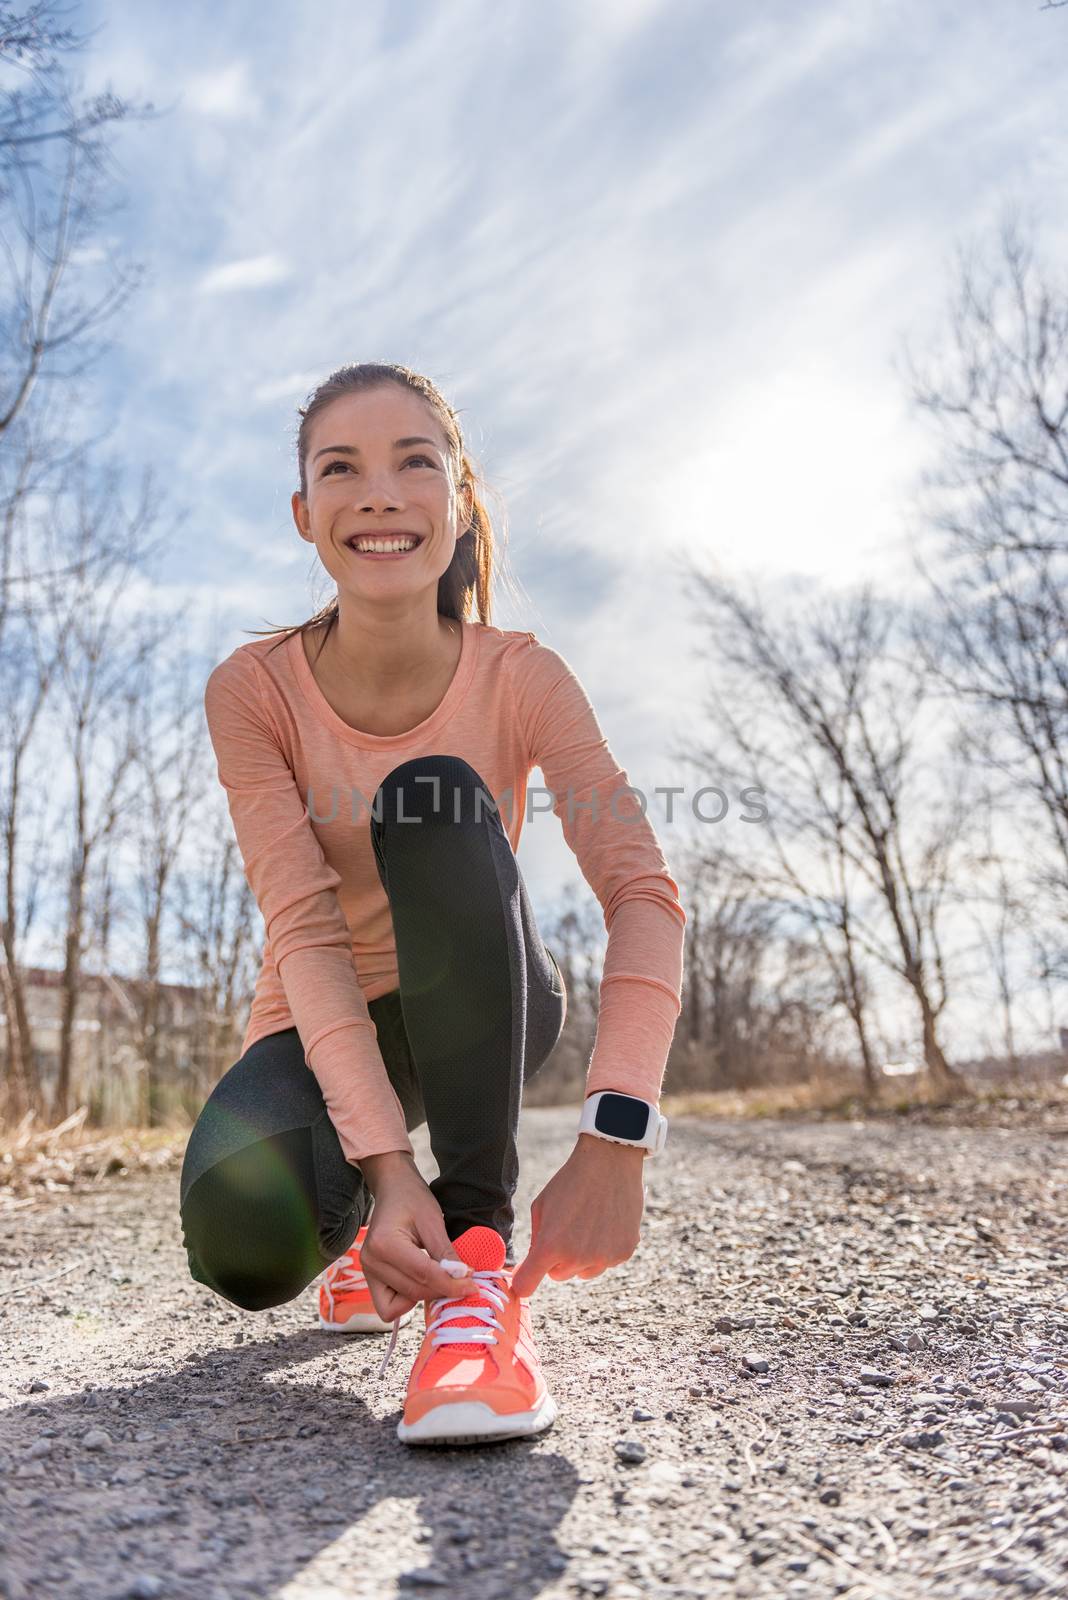 Autumn trail runner asian girl tying running shoes wearing sports smartwatch gadget gear. Female active athlete lacing shoe laces on forest path using smart watch heart rate fitness monitor.